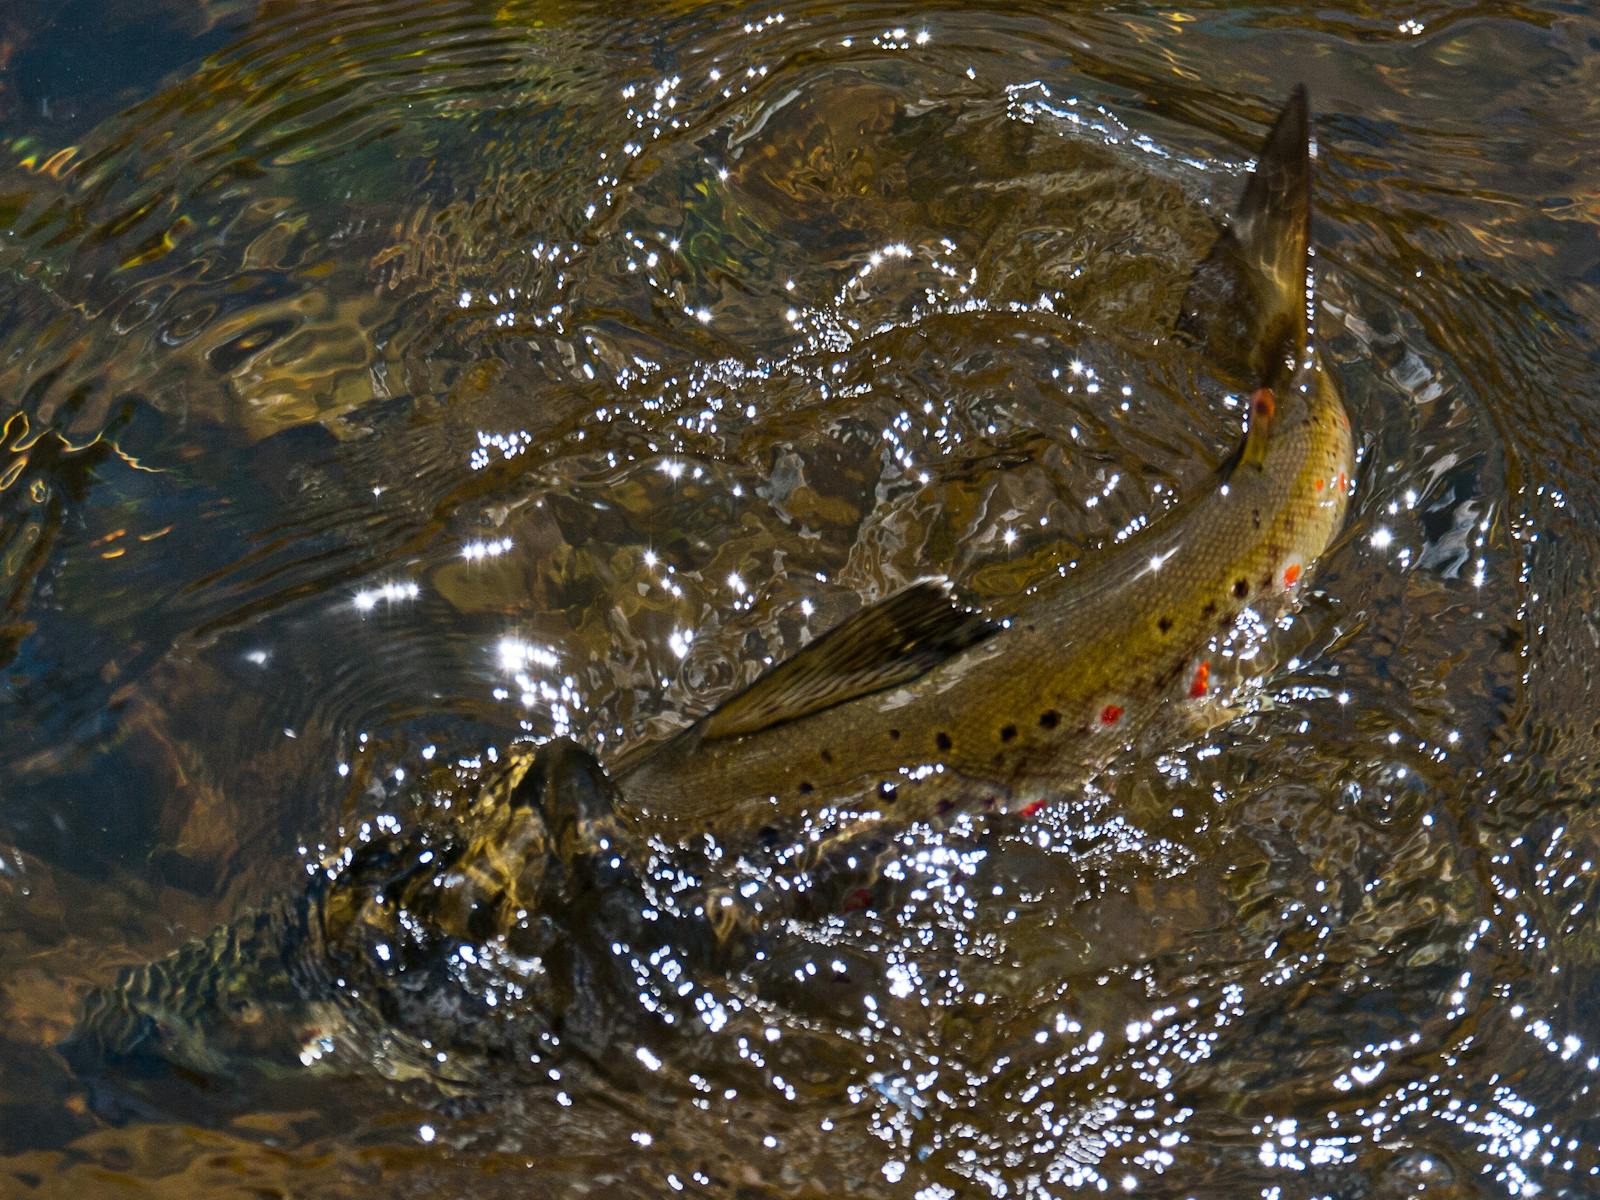 A fish in the shallow river water